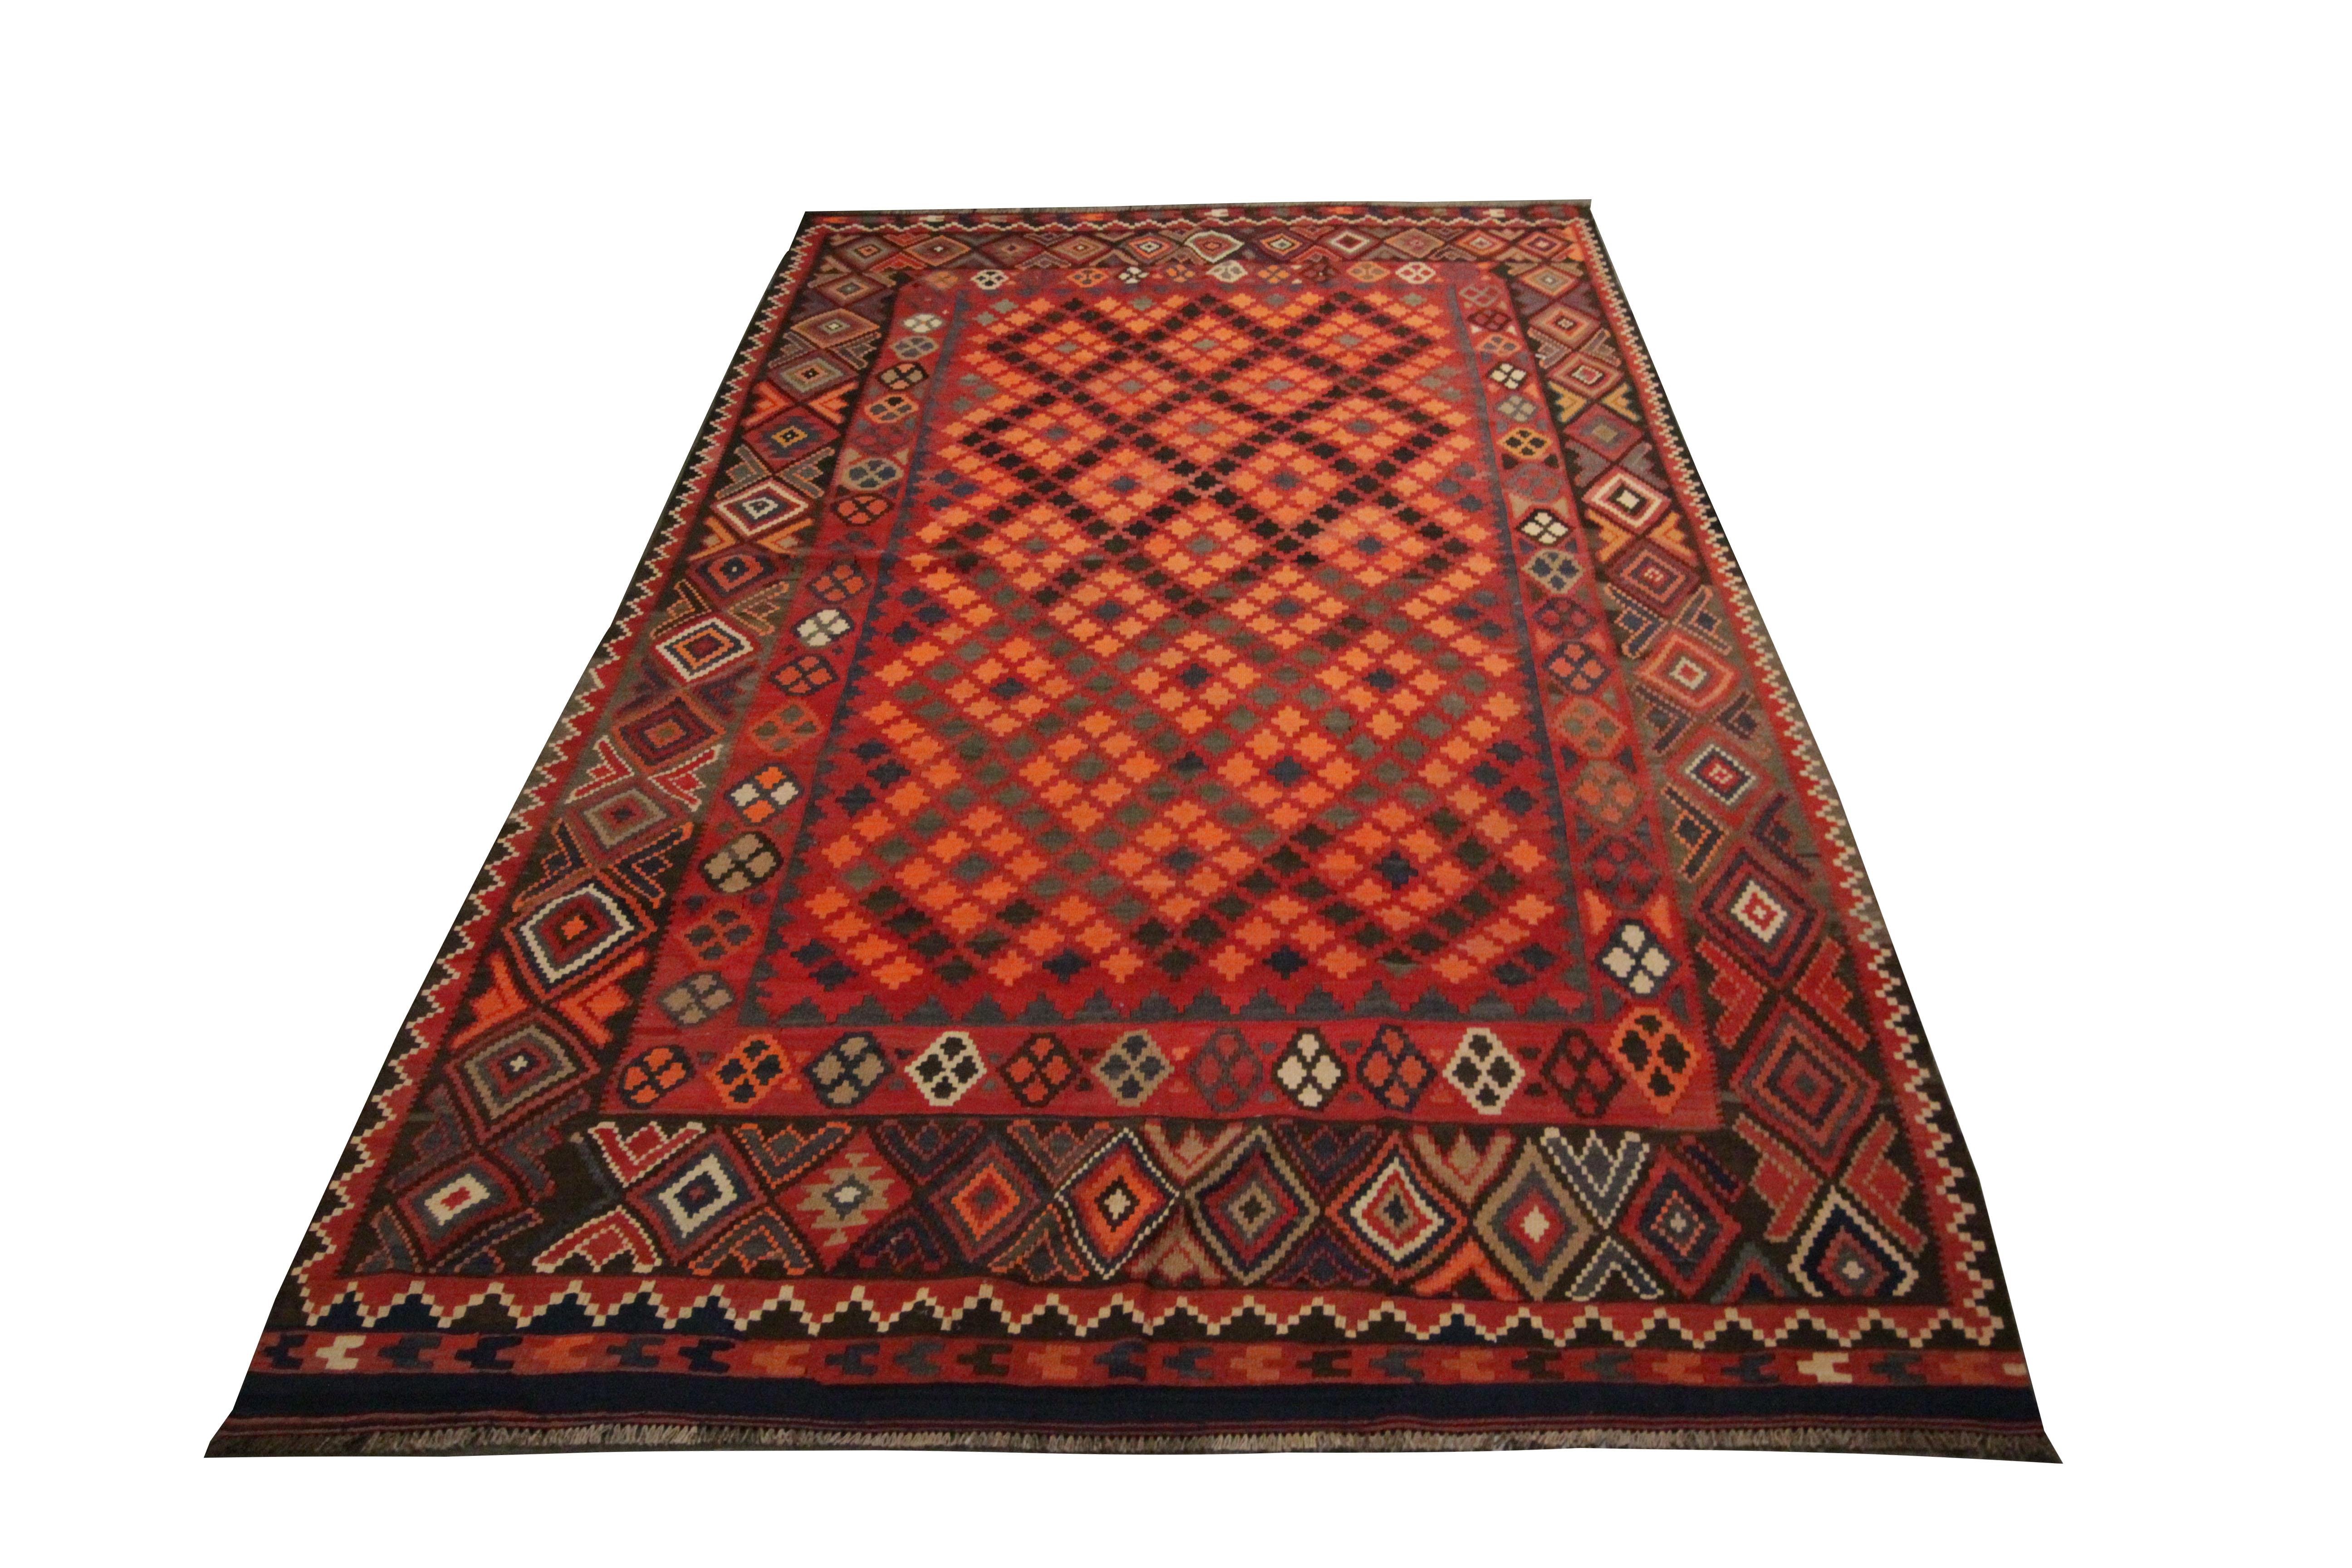 This fine wool rug is a traditional geometric Kilim rug, woven by hand in the late 20th /early 21st century. The design features a bold geometric design with diamond patterns in accents of orange, blue, grey and brown. Woven with fine, hand-spun